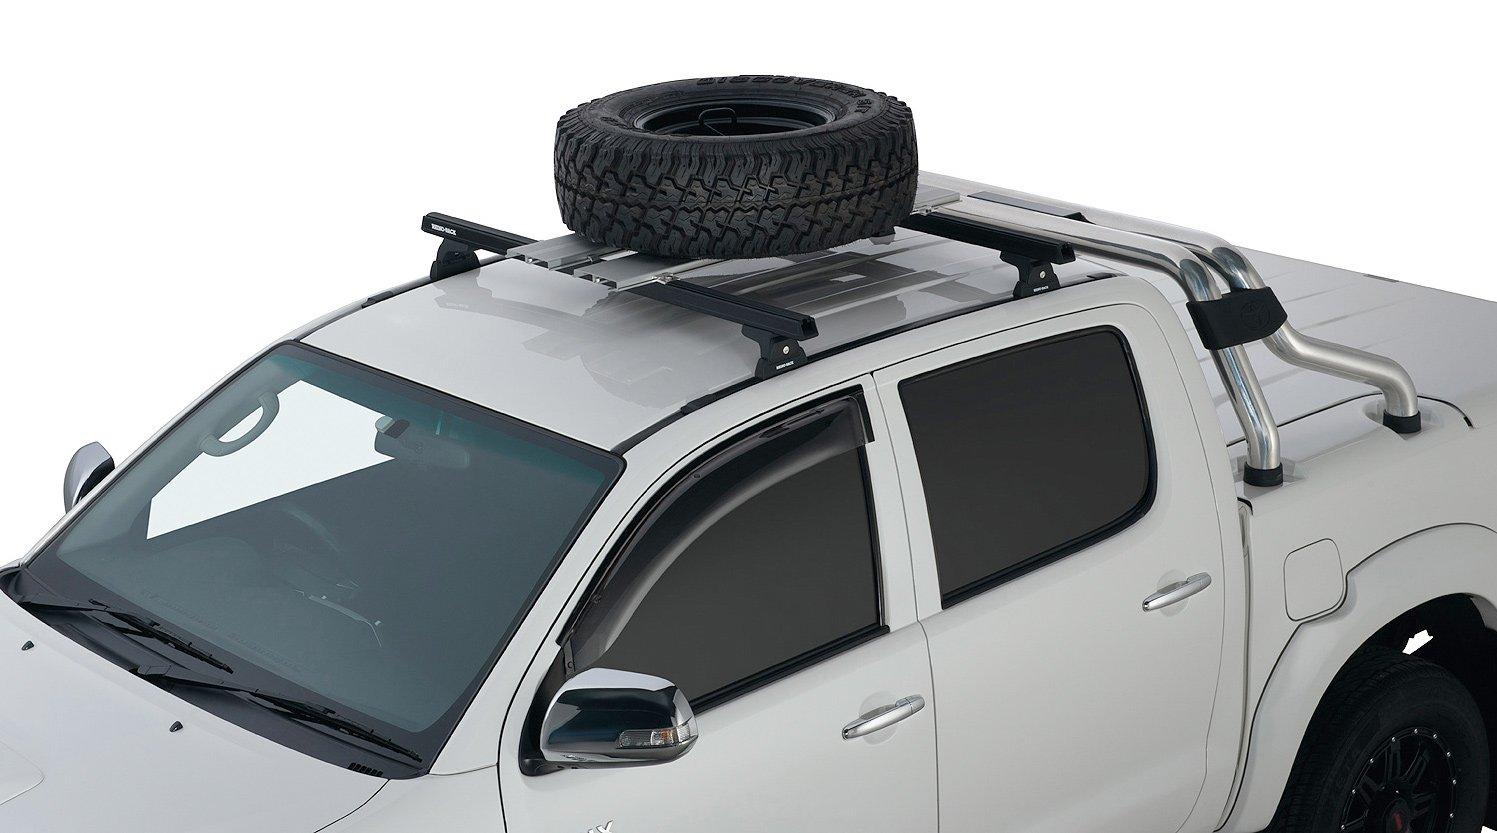 Cargo Carriers For Roof Racks